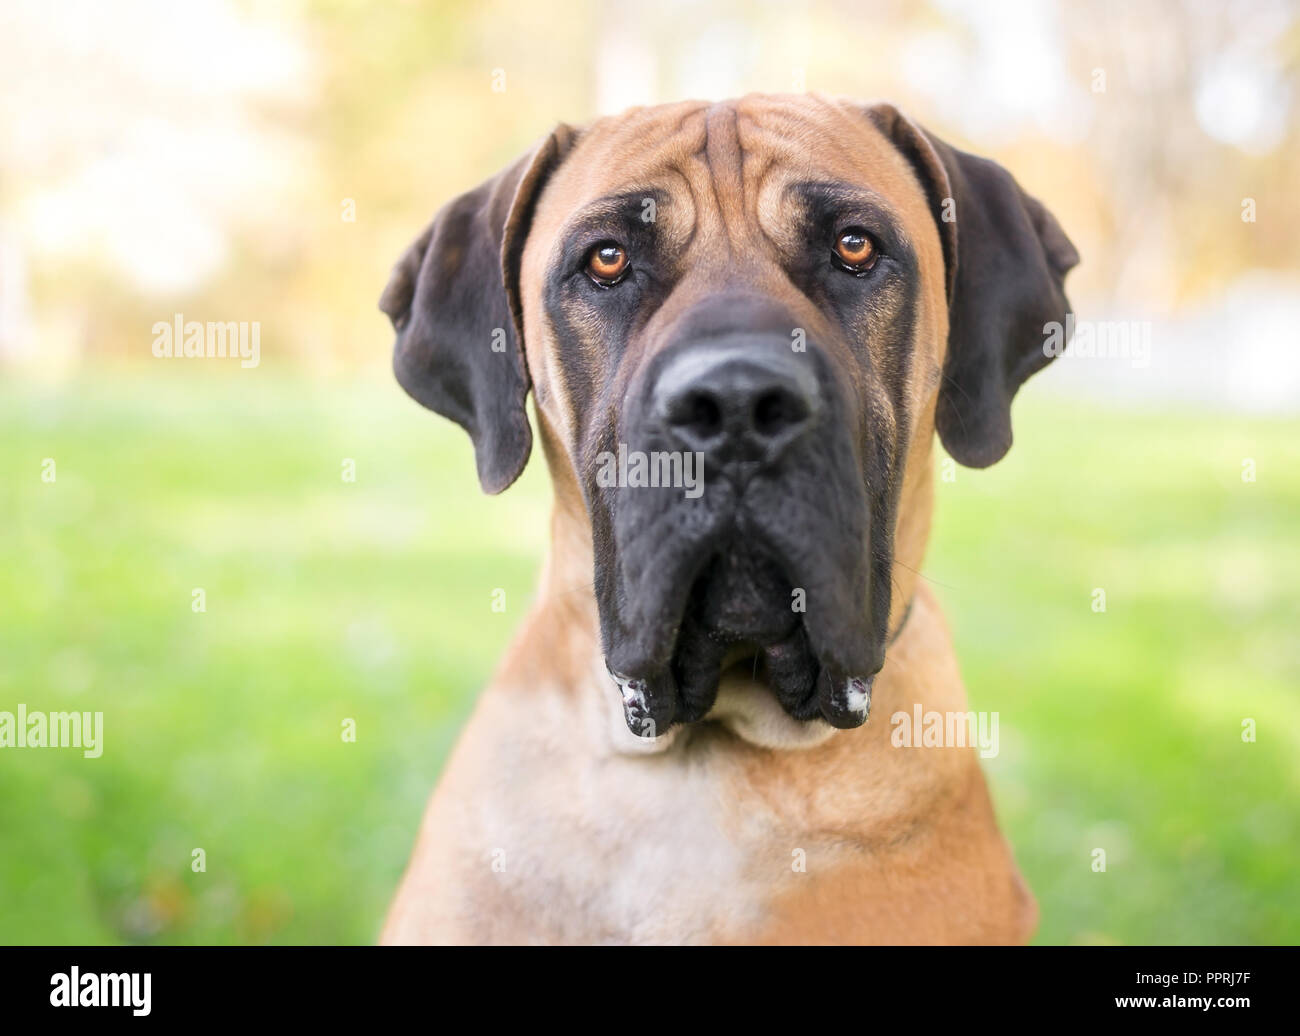 A Boerboel dog with a serious expression outdoors Stock Photo